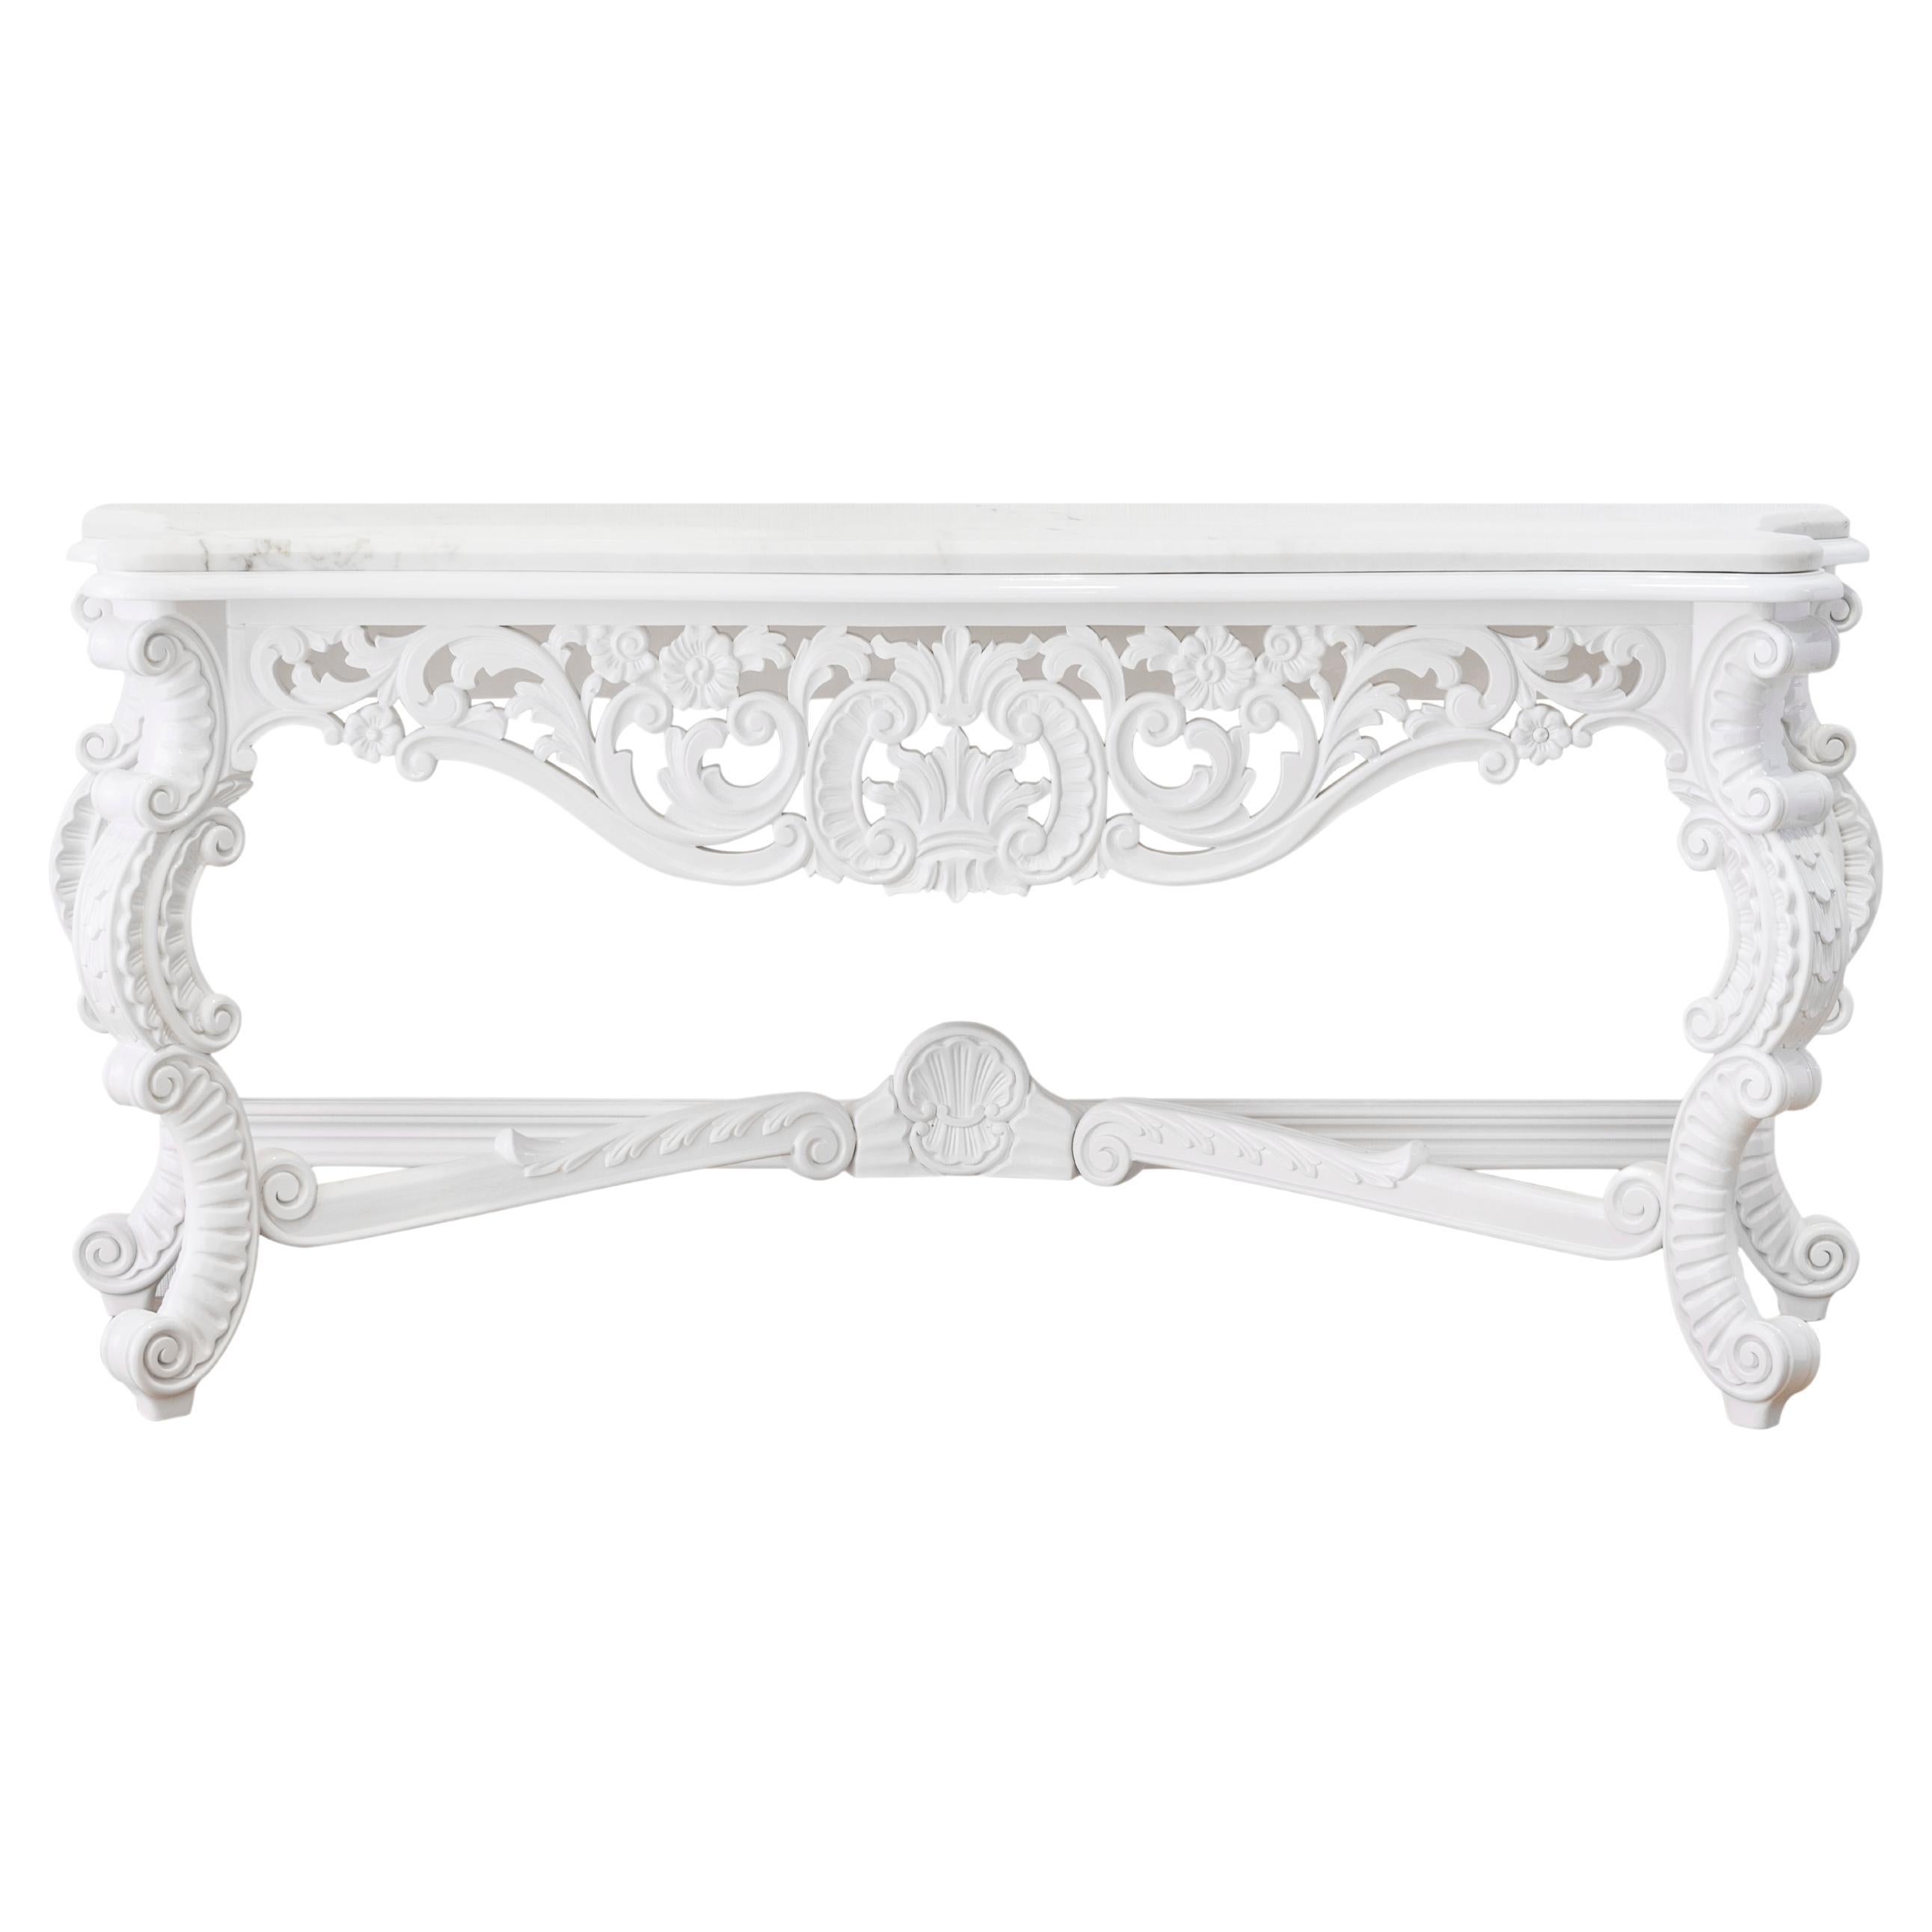 French Neoclassical Parma Console Table Hand Carved Handmade Portugal Greenapple